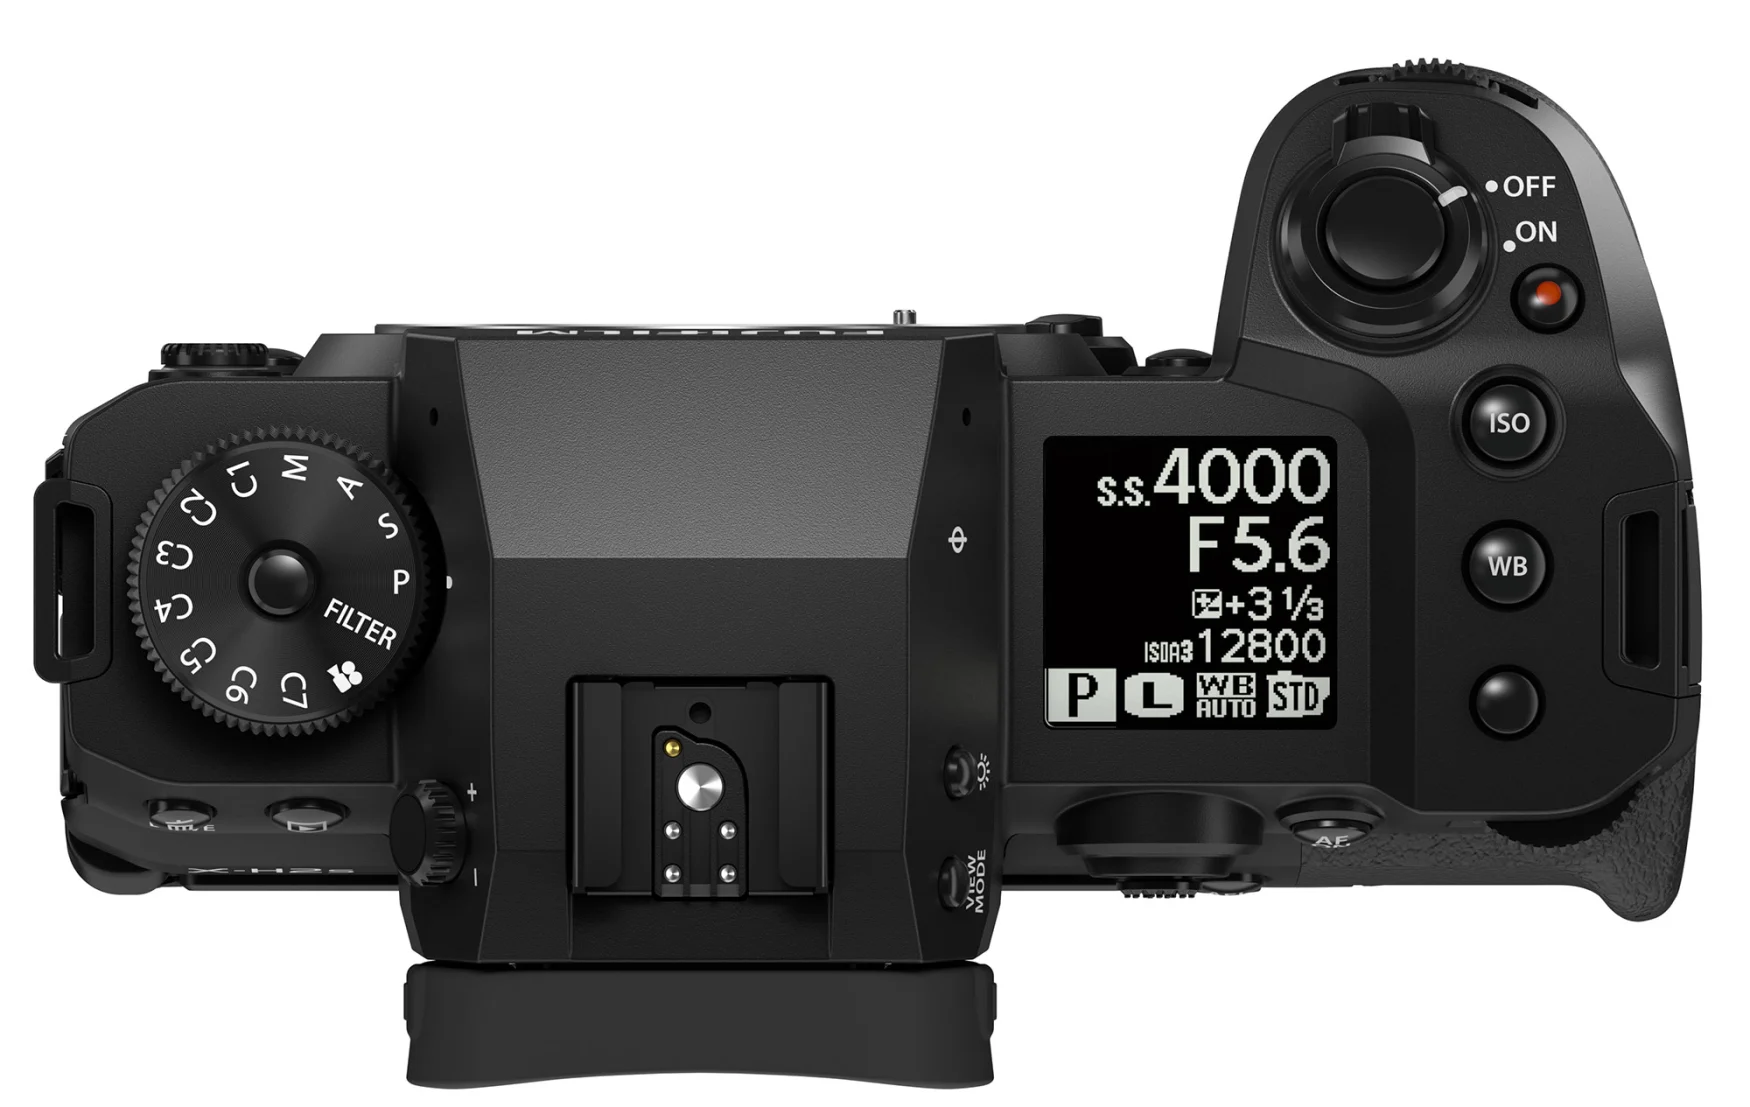 Fujifilm's flagship X-H2S camera offers 6.2K video and 40 fps burst shooting